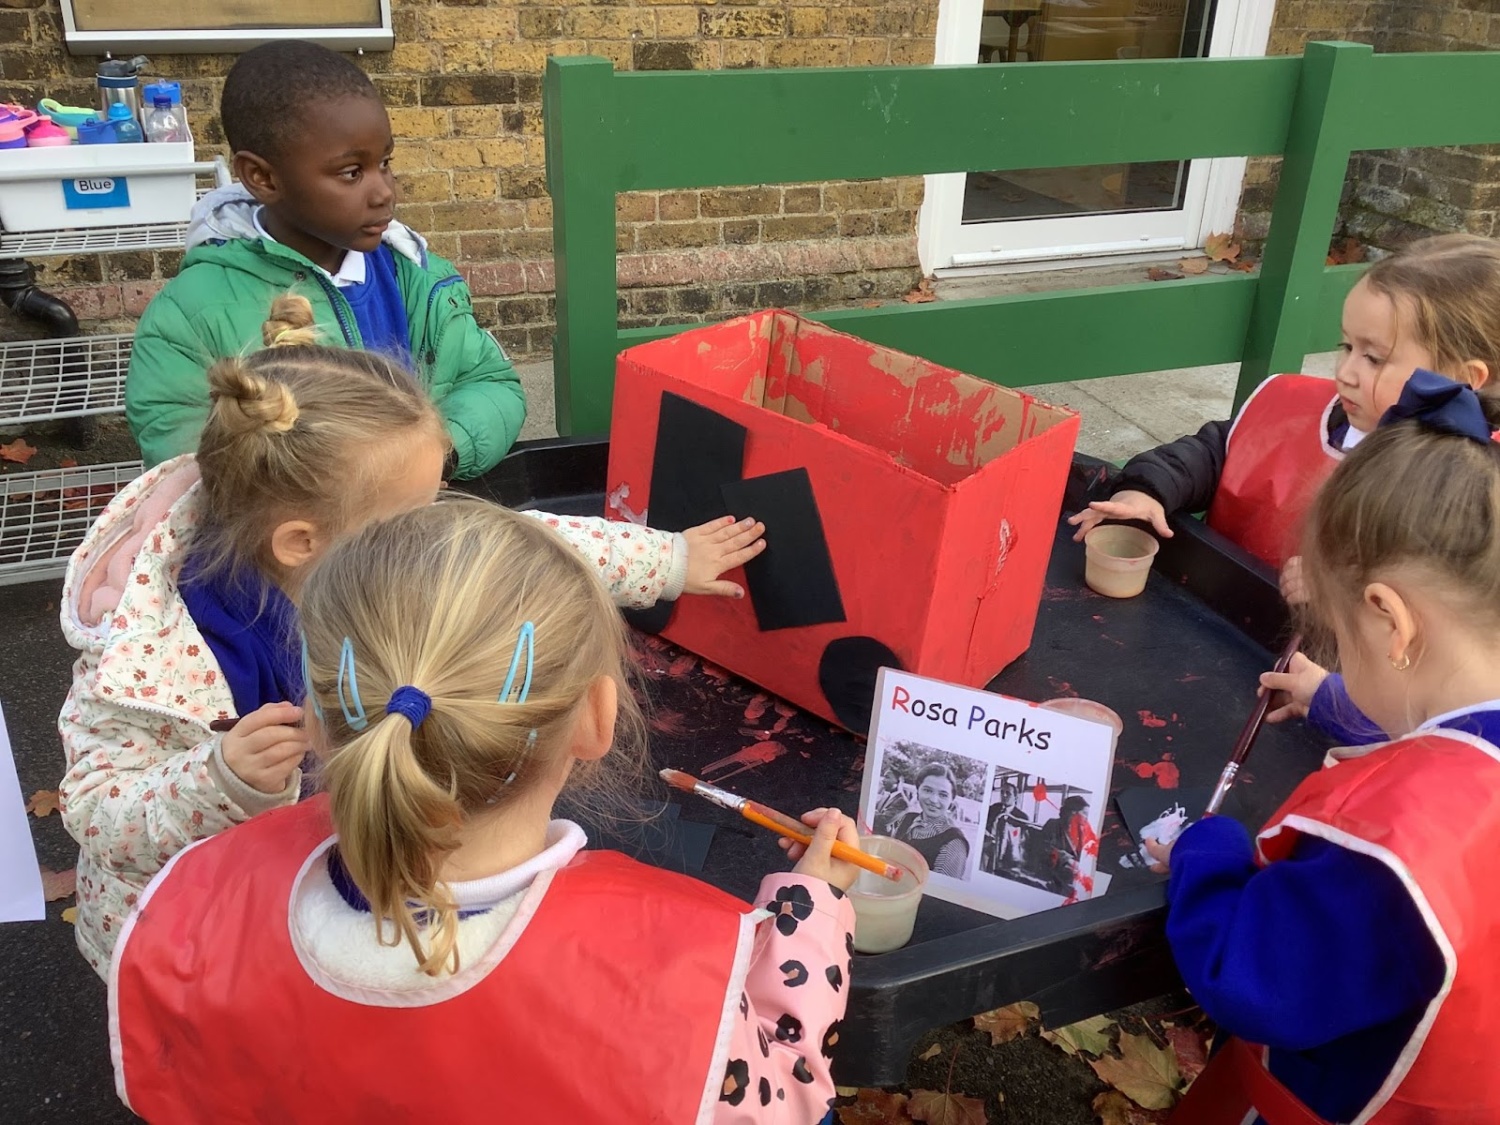 A small group of pupils are seen outdoors on the academy grounds, decorating a box using paints and coloured paper.